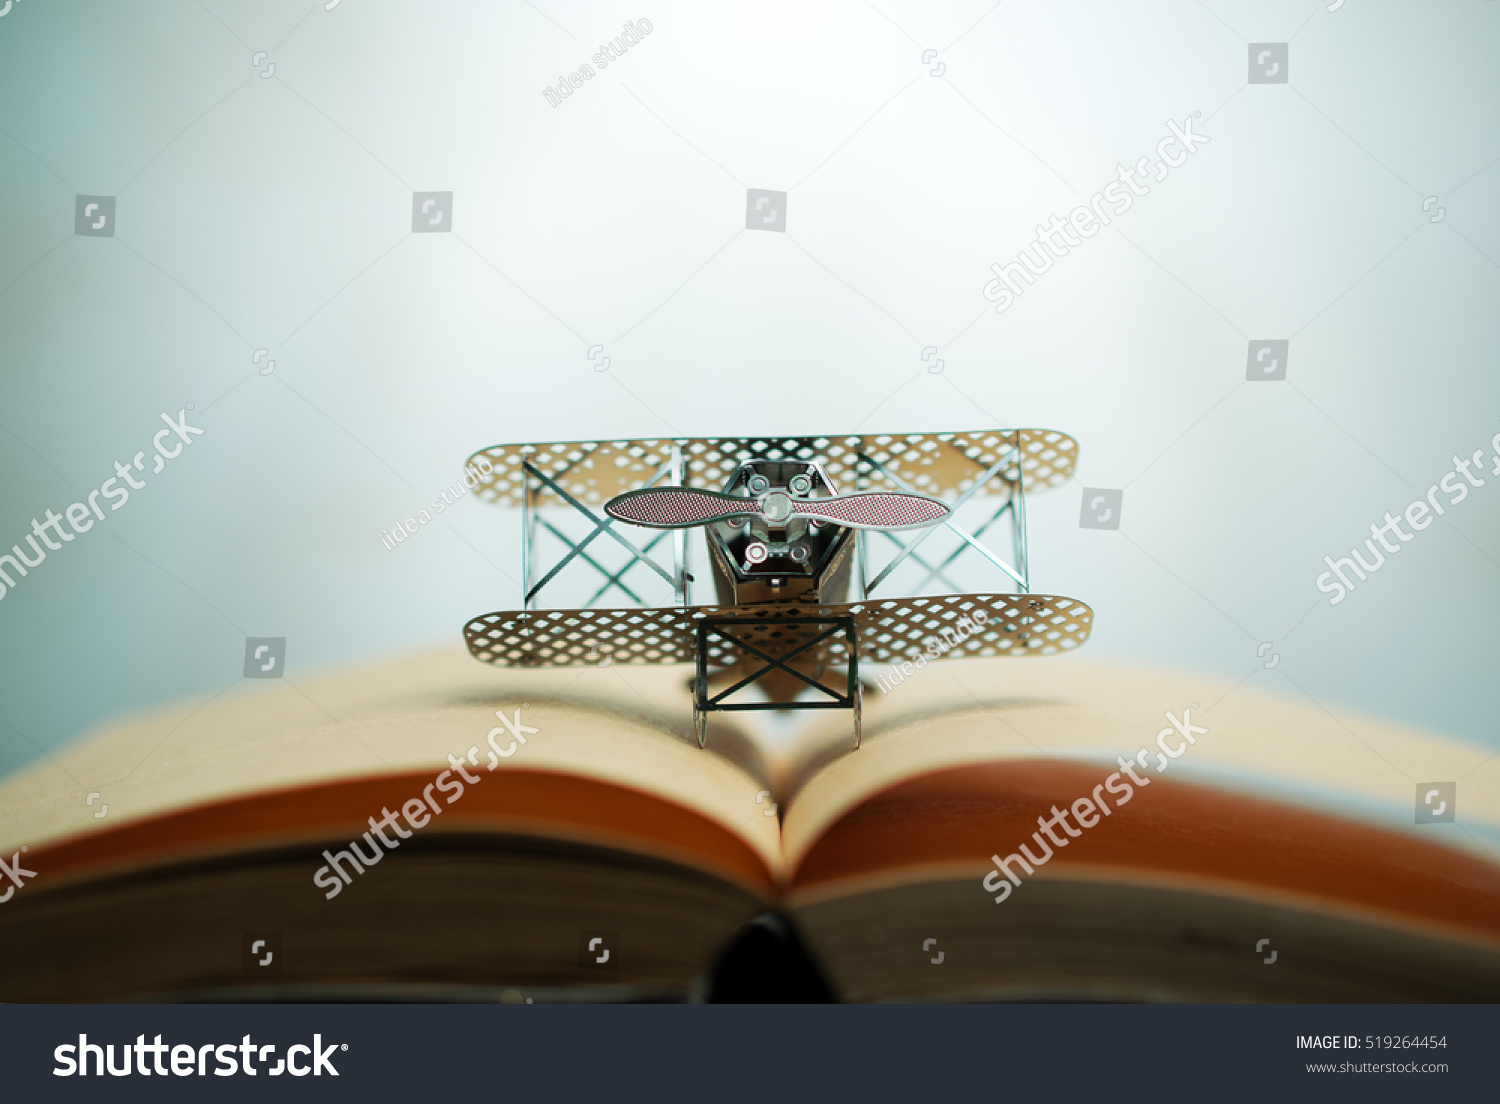 aircraft fighter on open education book with abstract light , education planner
concept. #519264454